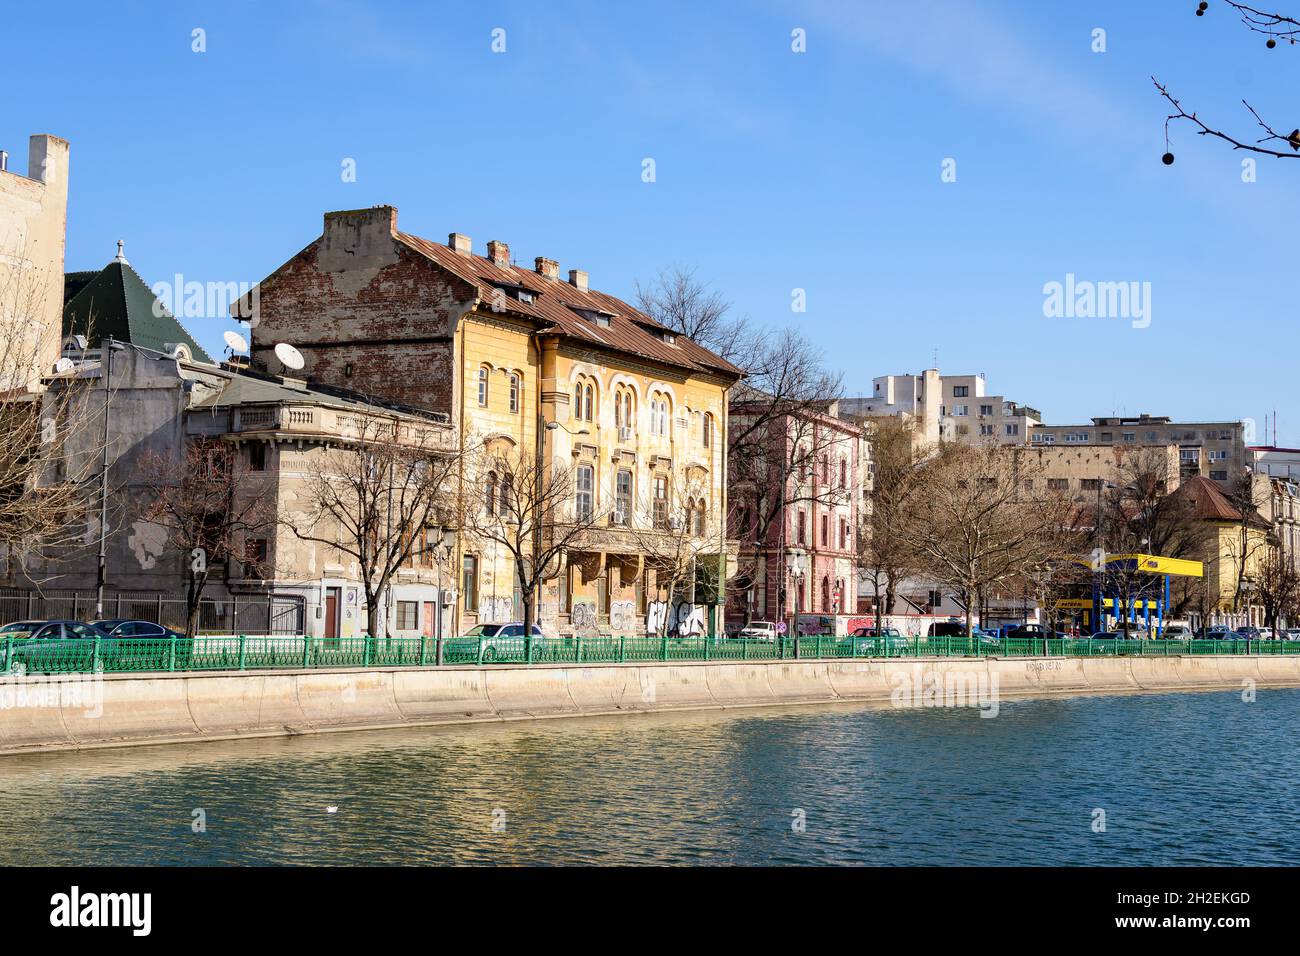 Bucharest, Romania, 13 February 2021 - Landscape with large old trees and old buildings near Dambovita river and clear blue sky in the center of Bucha Stock Photo